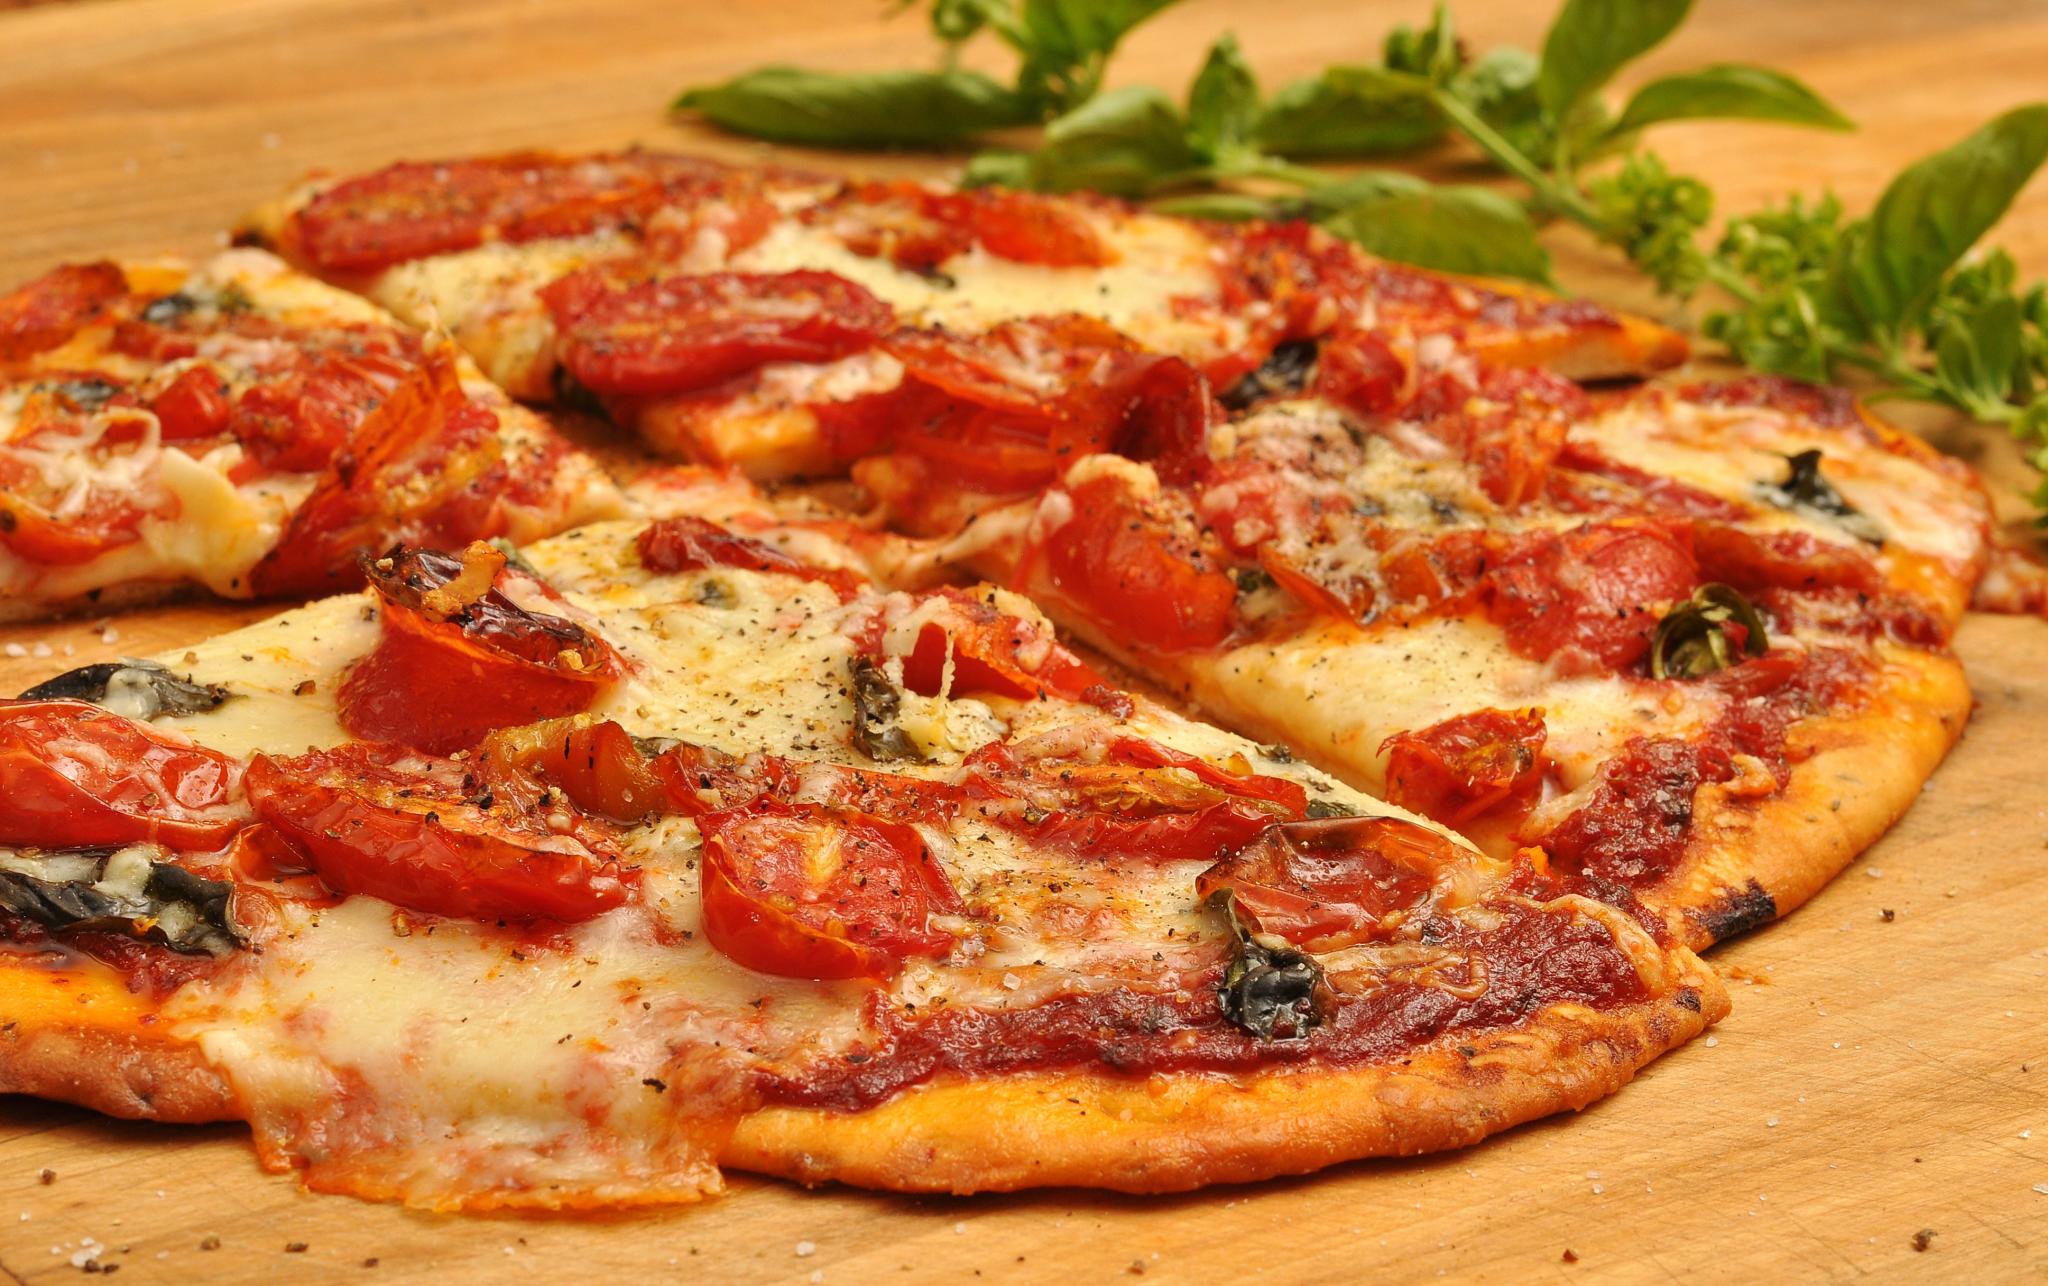 An Italian pizza with tomatoes